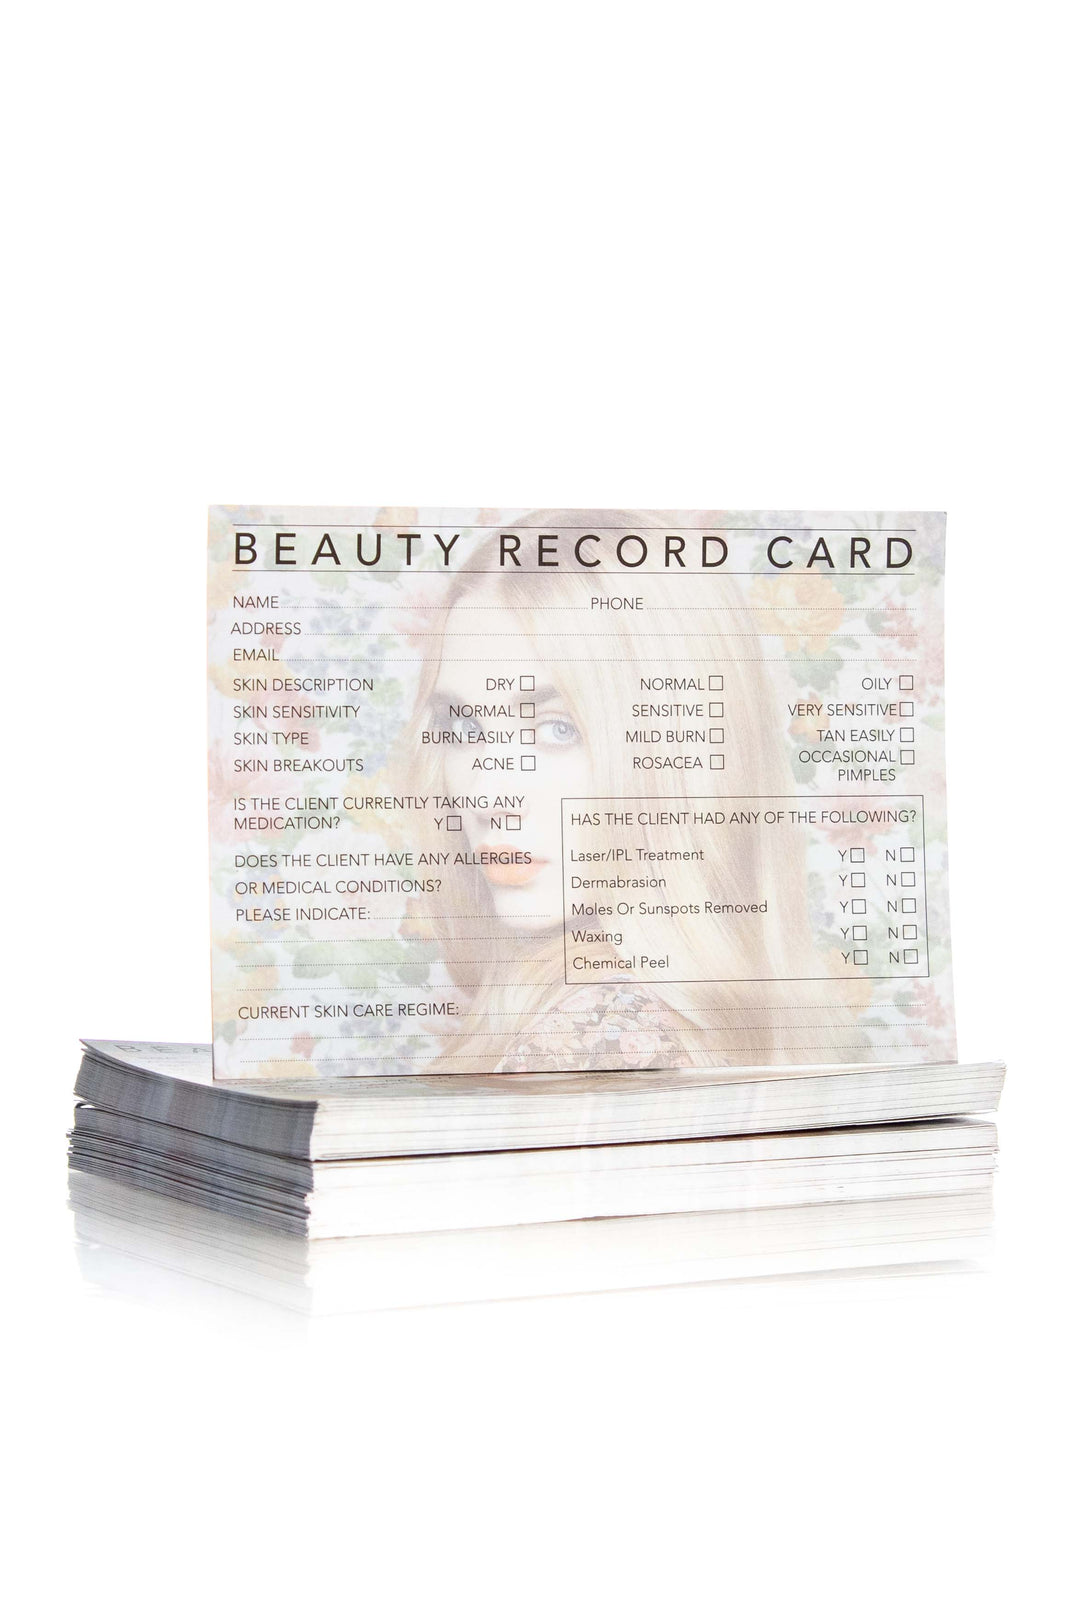 DATELINE PROFESSIONAL BEAUTY THERAPY RECORD CARDS